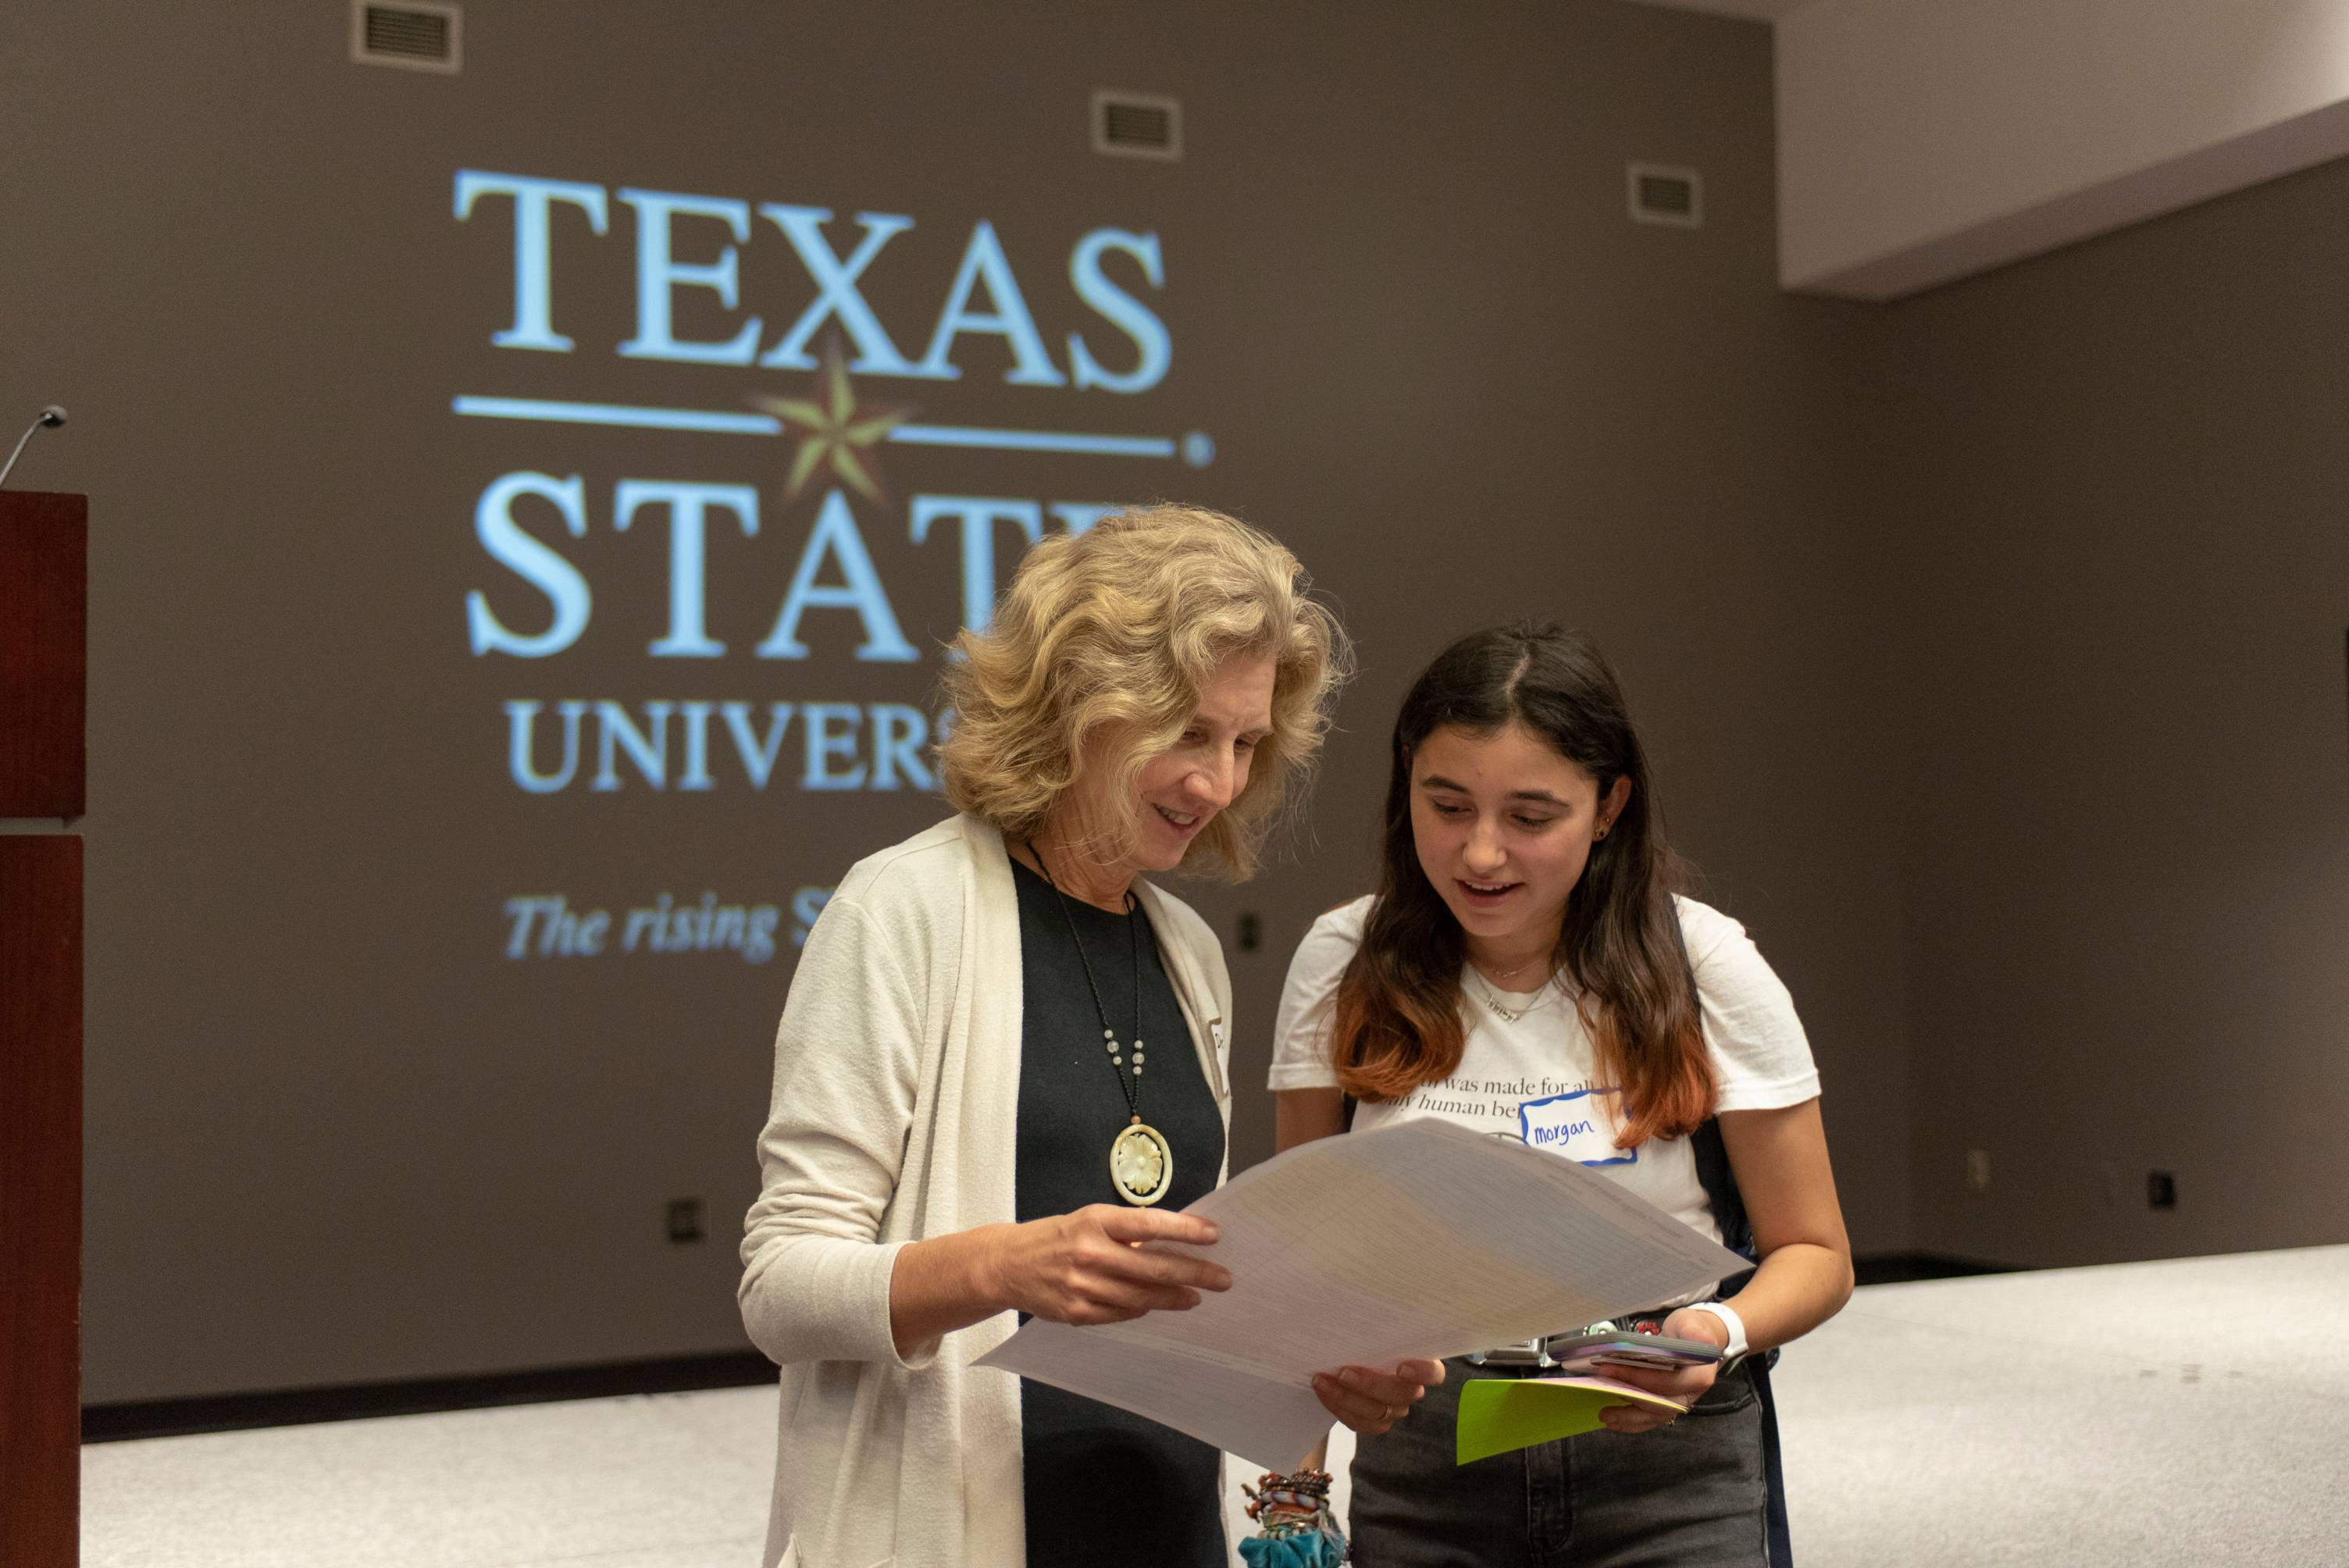 Honors College Meet The Professor 2019 -Dean Galloway and Student